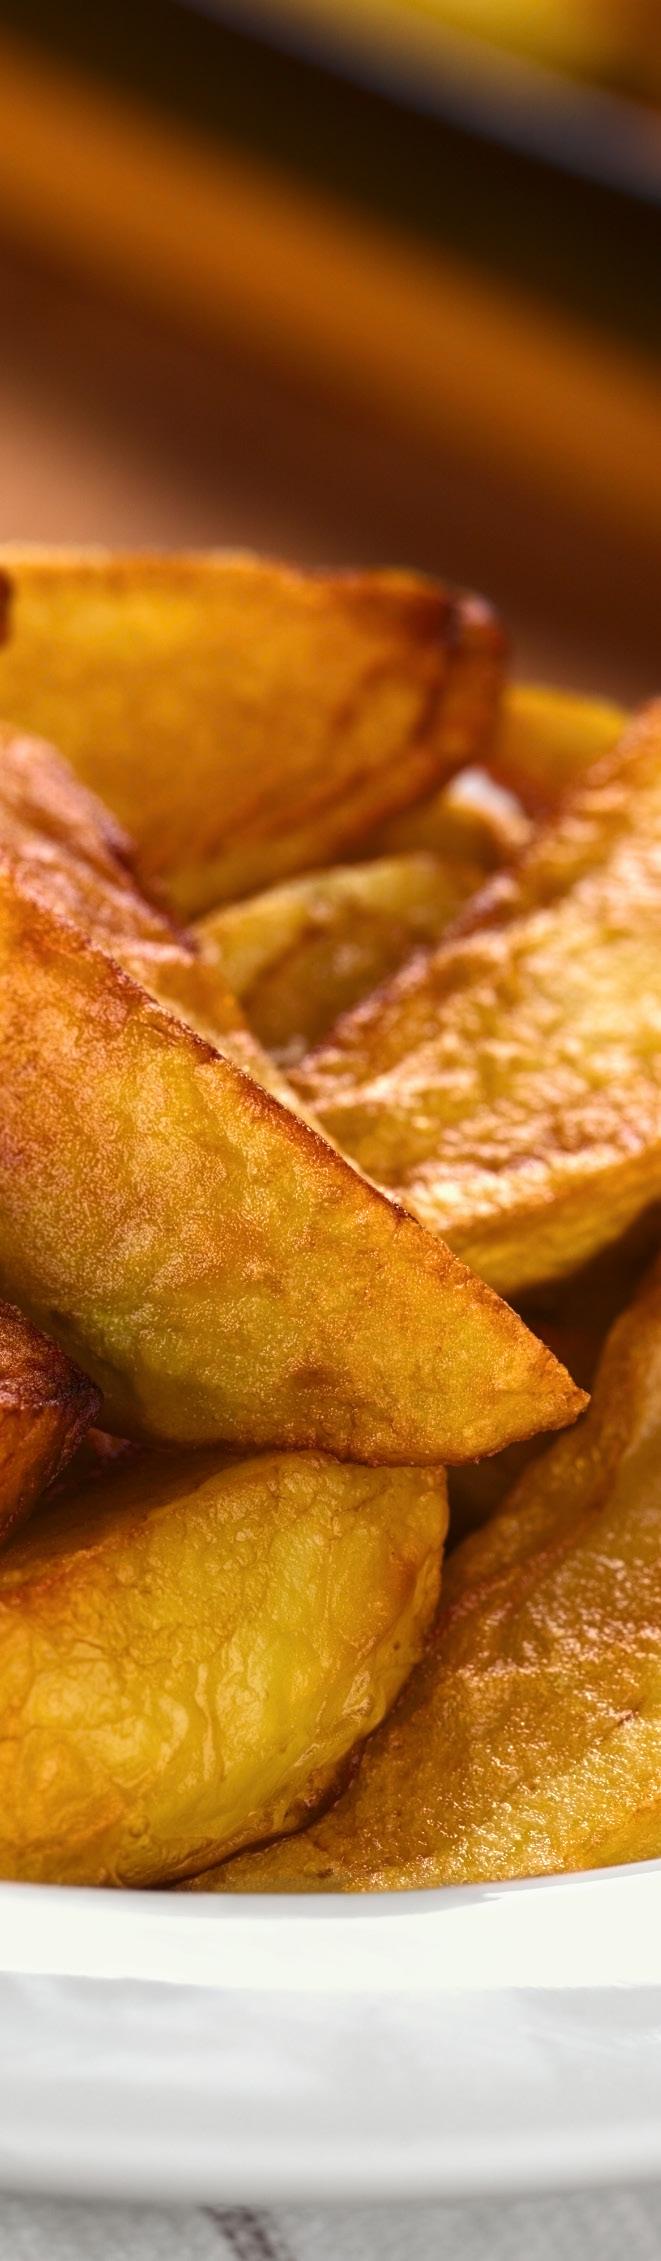 homemade potato wedges 1Kg (approx.) large waxy potatoes Peel the potatoes and carefully cut each into wedge shapes Place the wedges into a bowl of water and leave them to soak for up to 30 minutes.